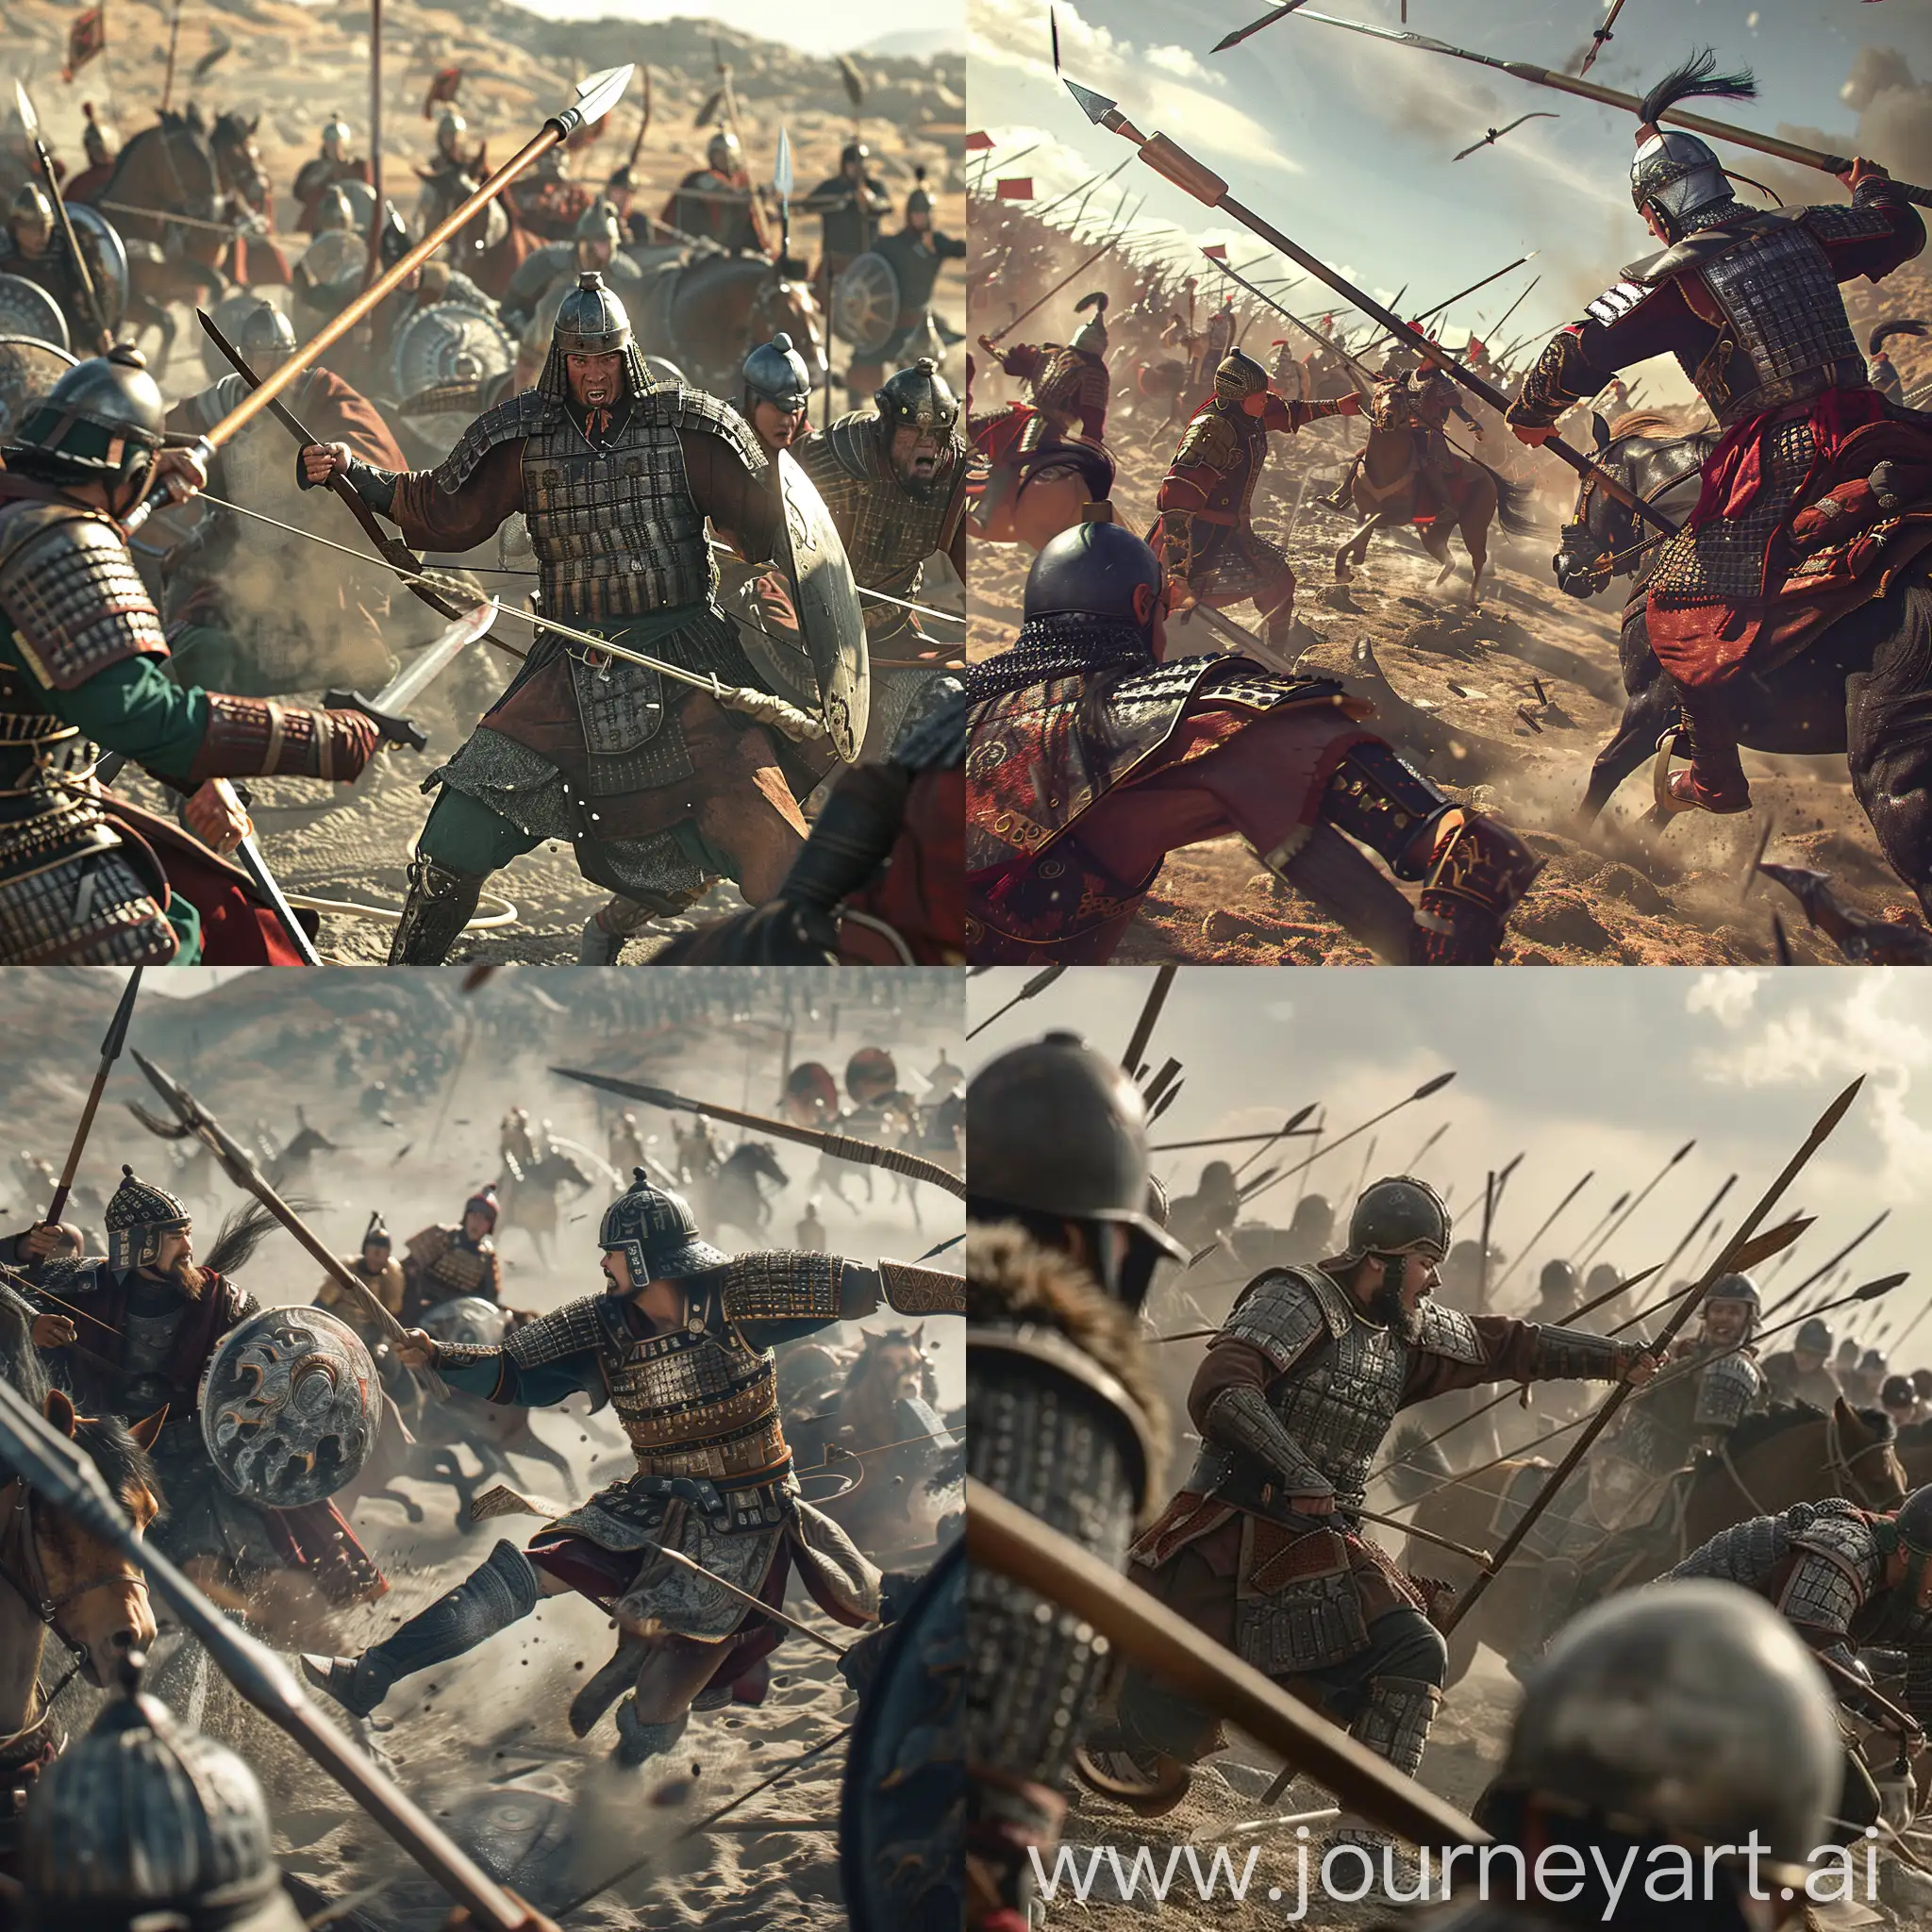 Qin-Warriors-Battle-Barbarians-on-the-Steppe